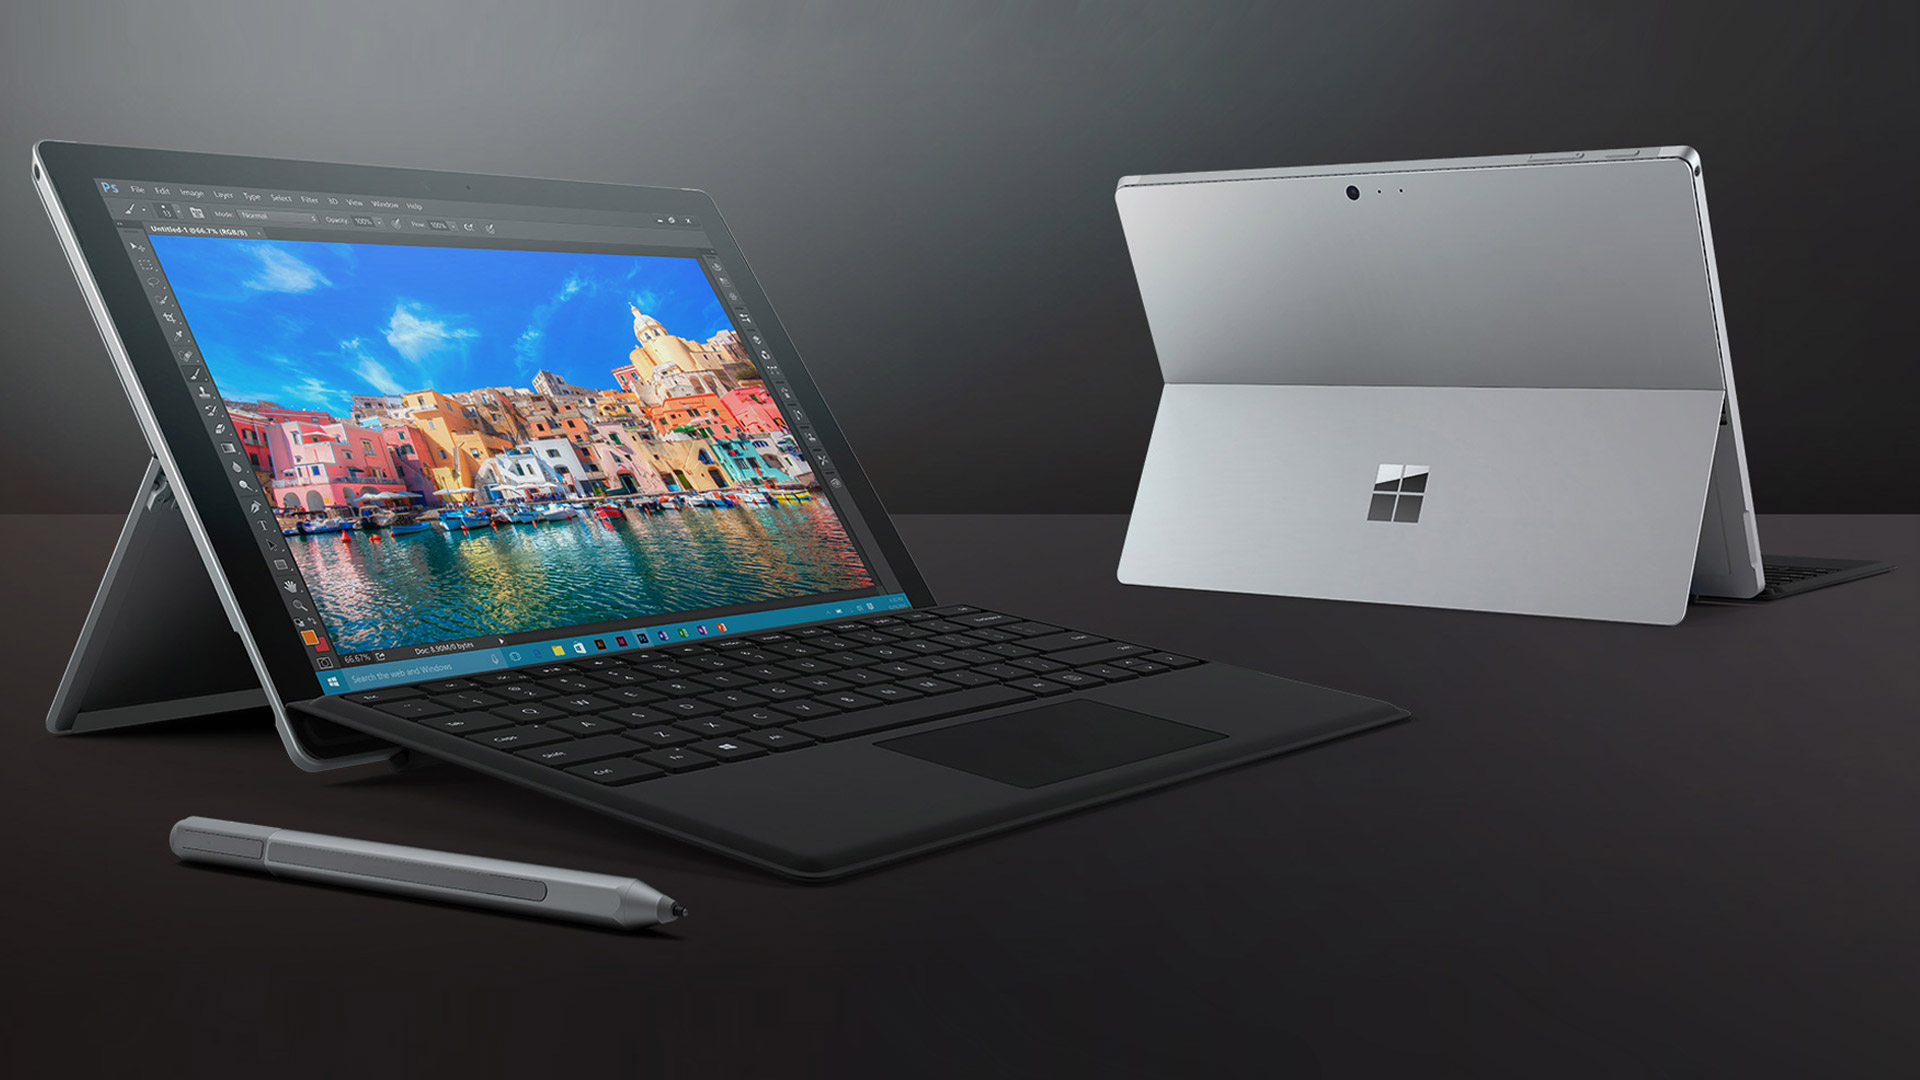 1920x1080 Why You Should Consider The Microsoft Surface Pro 4 Vs. The MacBook Pro &acirc;&#128;&#148; UNFUSED | Deo Veritas' Online Journal | STYLE FOOD TRAVEL LIFE